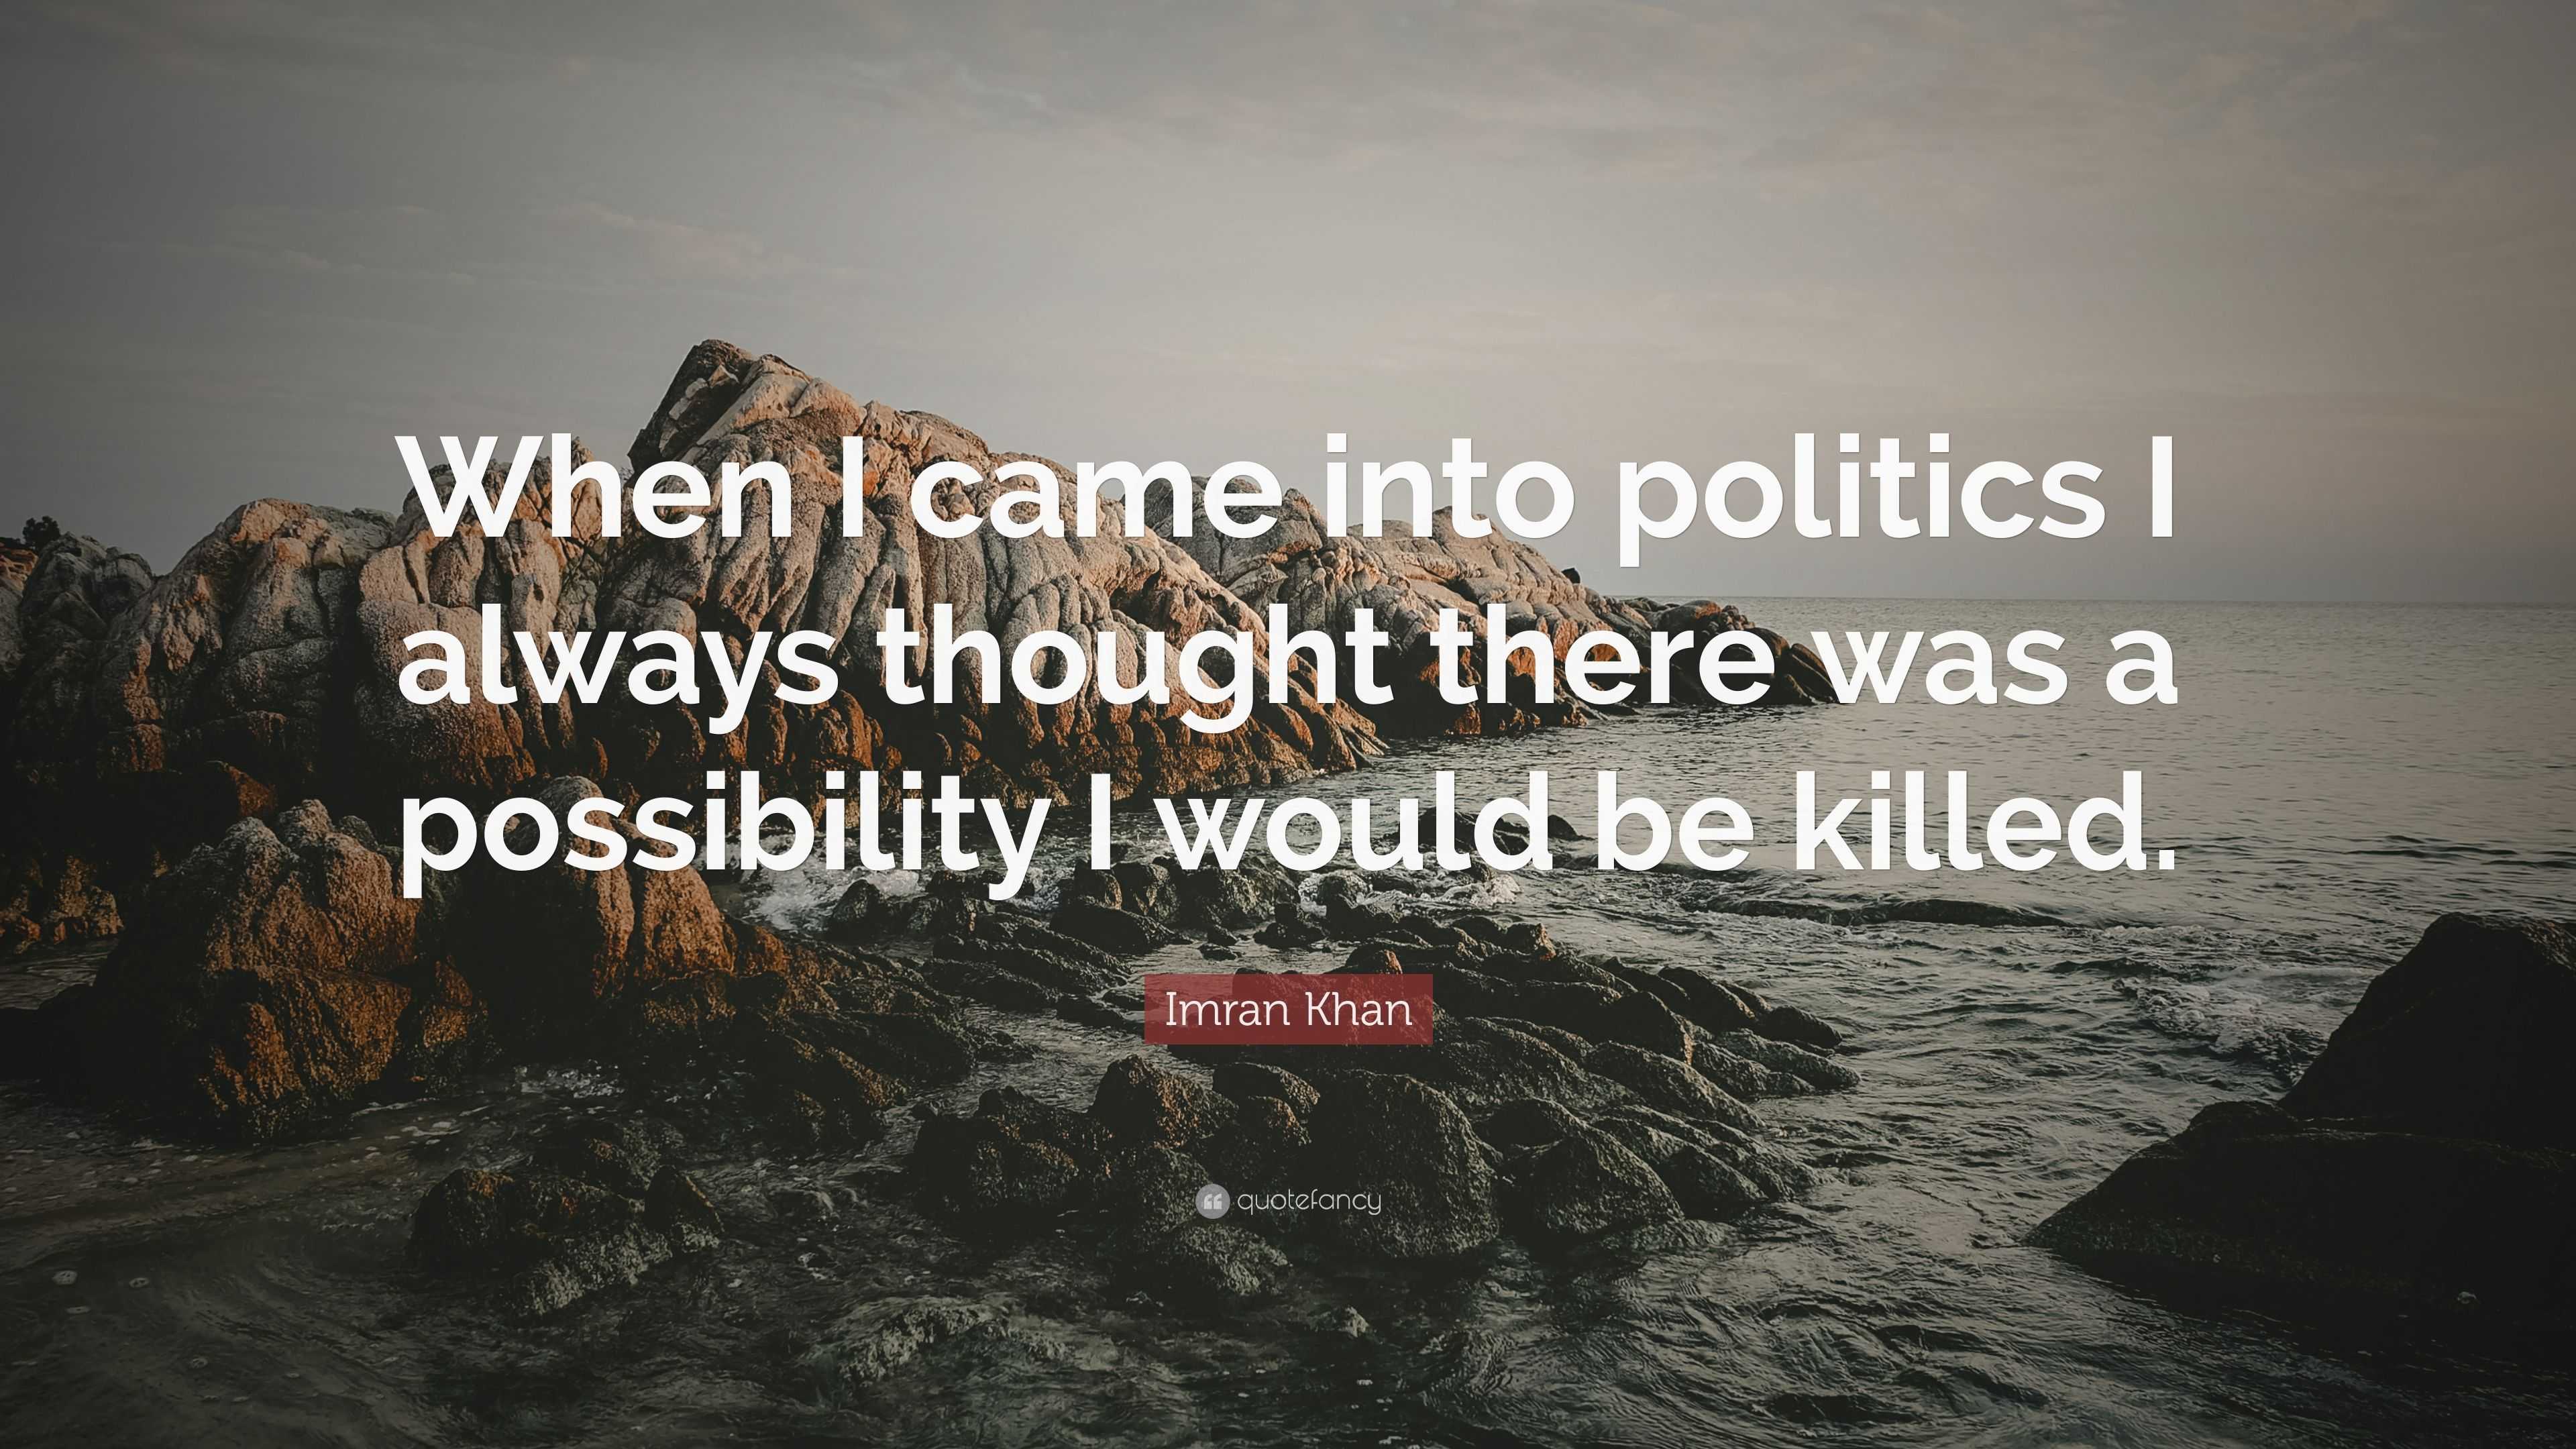 Imran Khan Quote: “When I came into politics I always thought there was